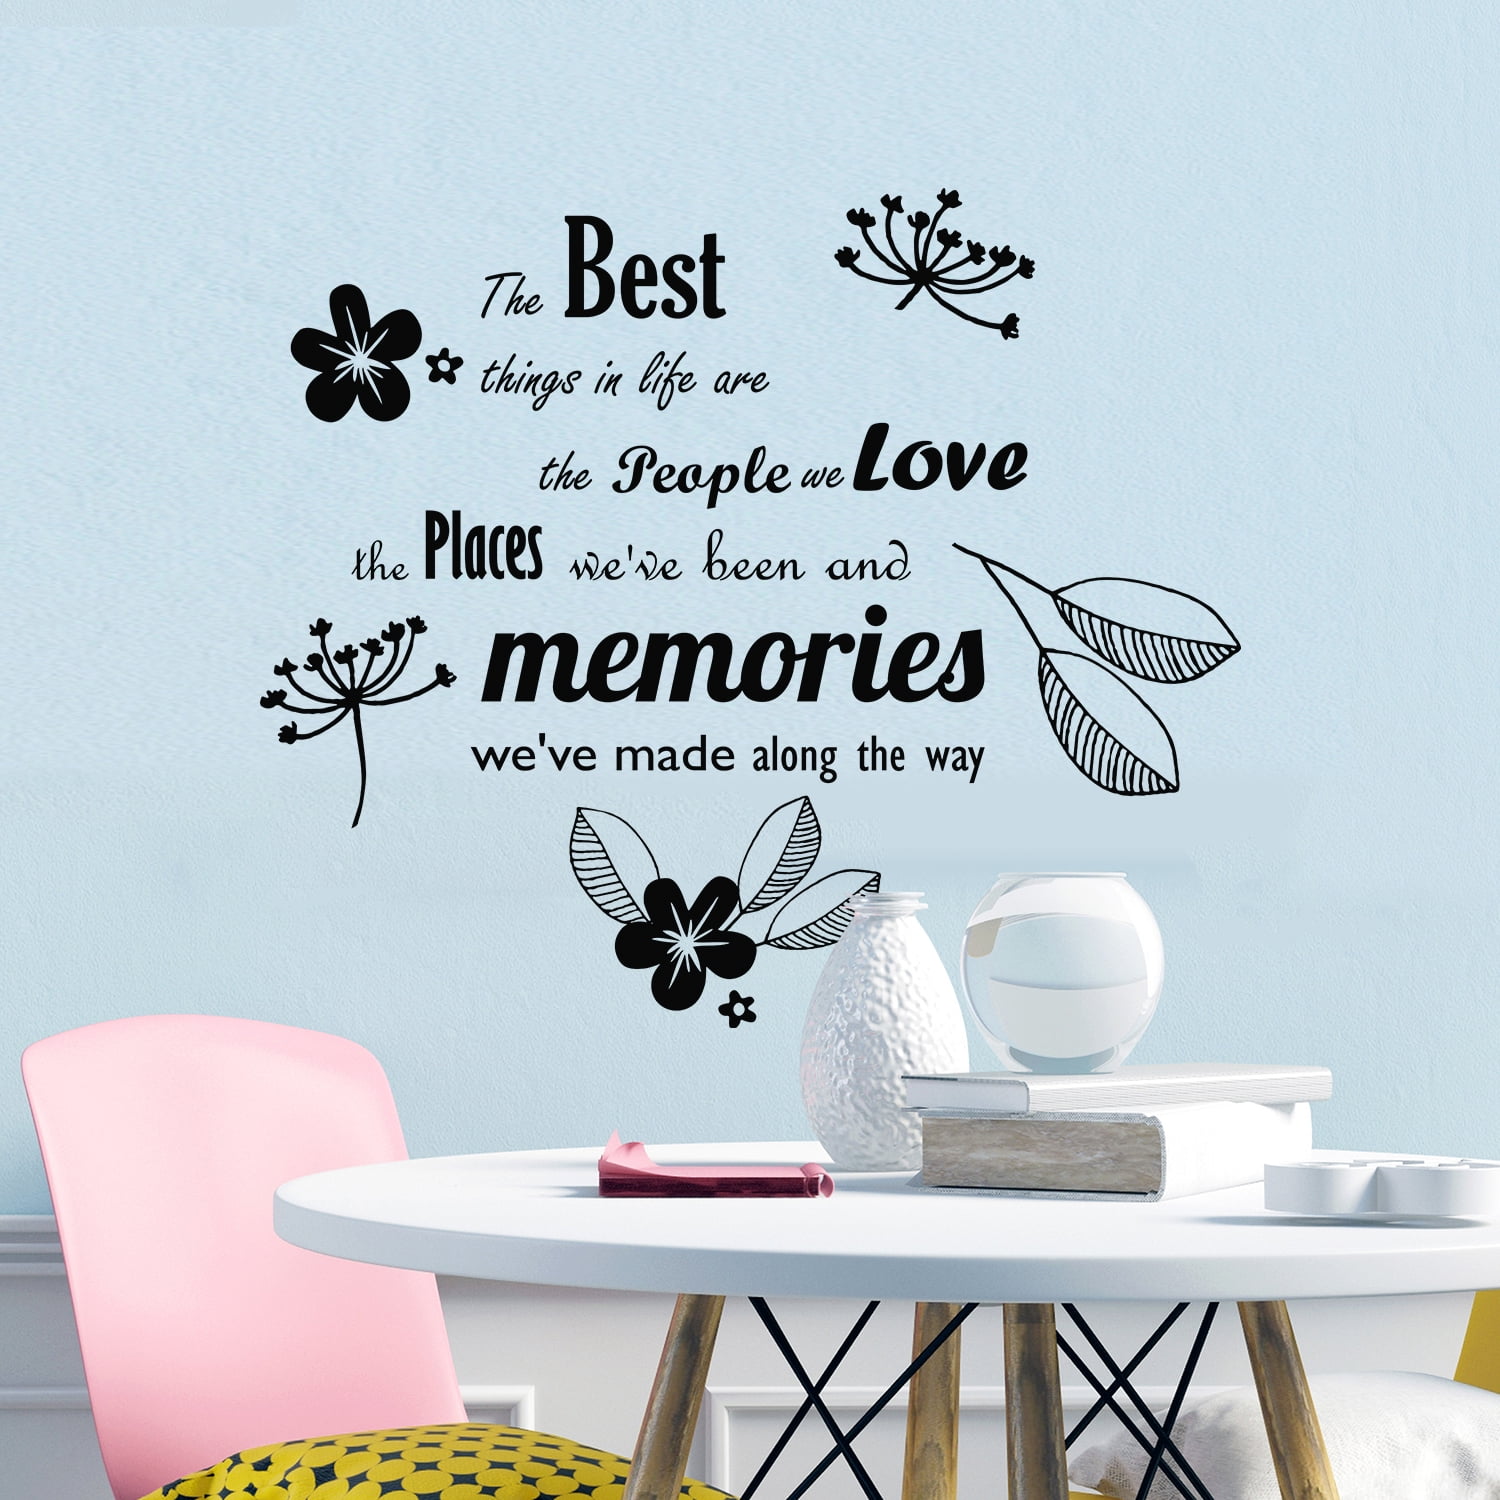 THE BEST THINGS IN LIFE QUOTE WALL ART DECAL STICKER DECOR LETTERING HOME DECAL